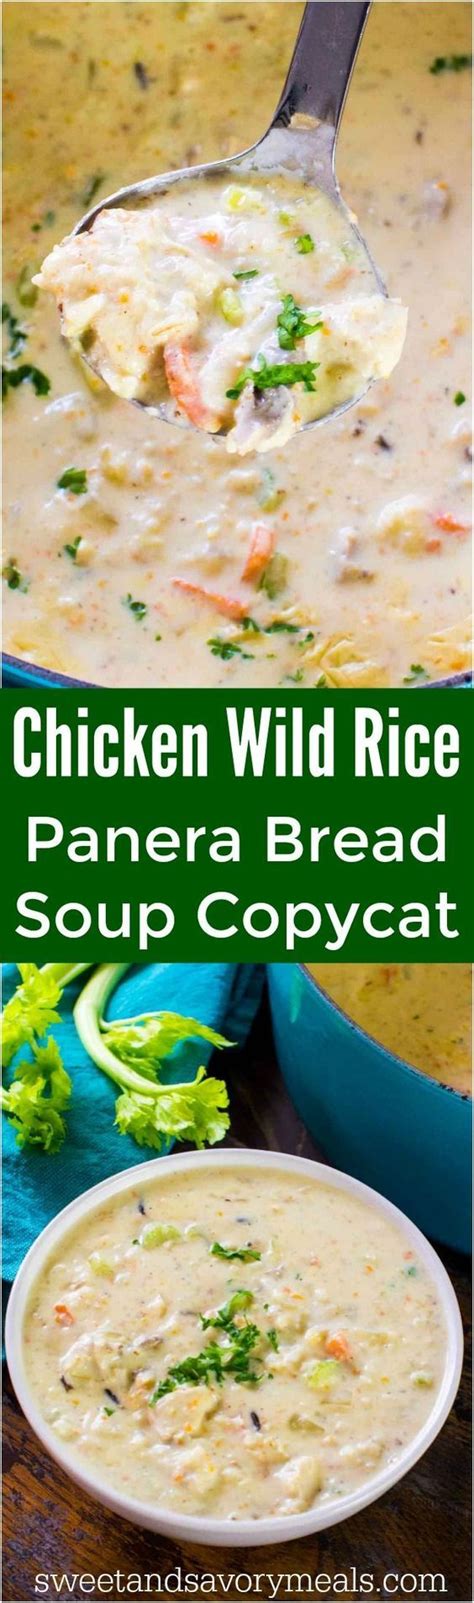 It's delicious and hearty, perfect for cold winter nights. Panera Bread Chicken Wild Rice Soup Copycat [VIDEO ...